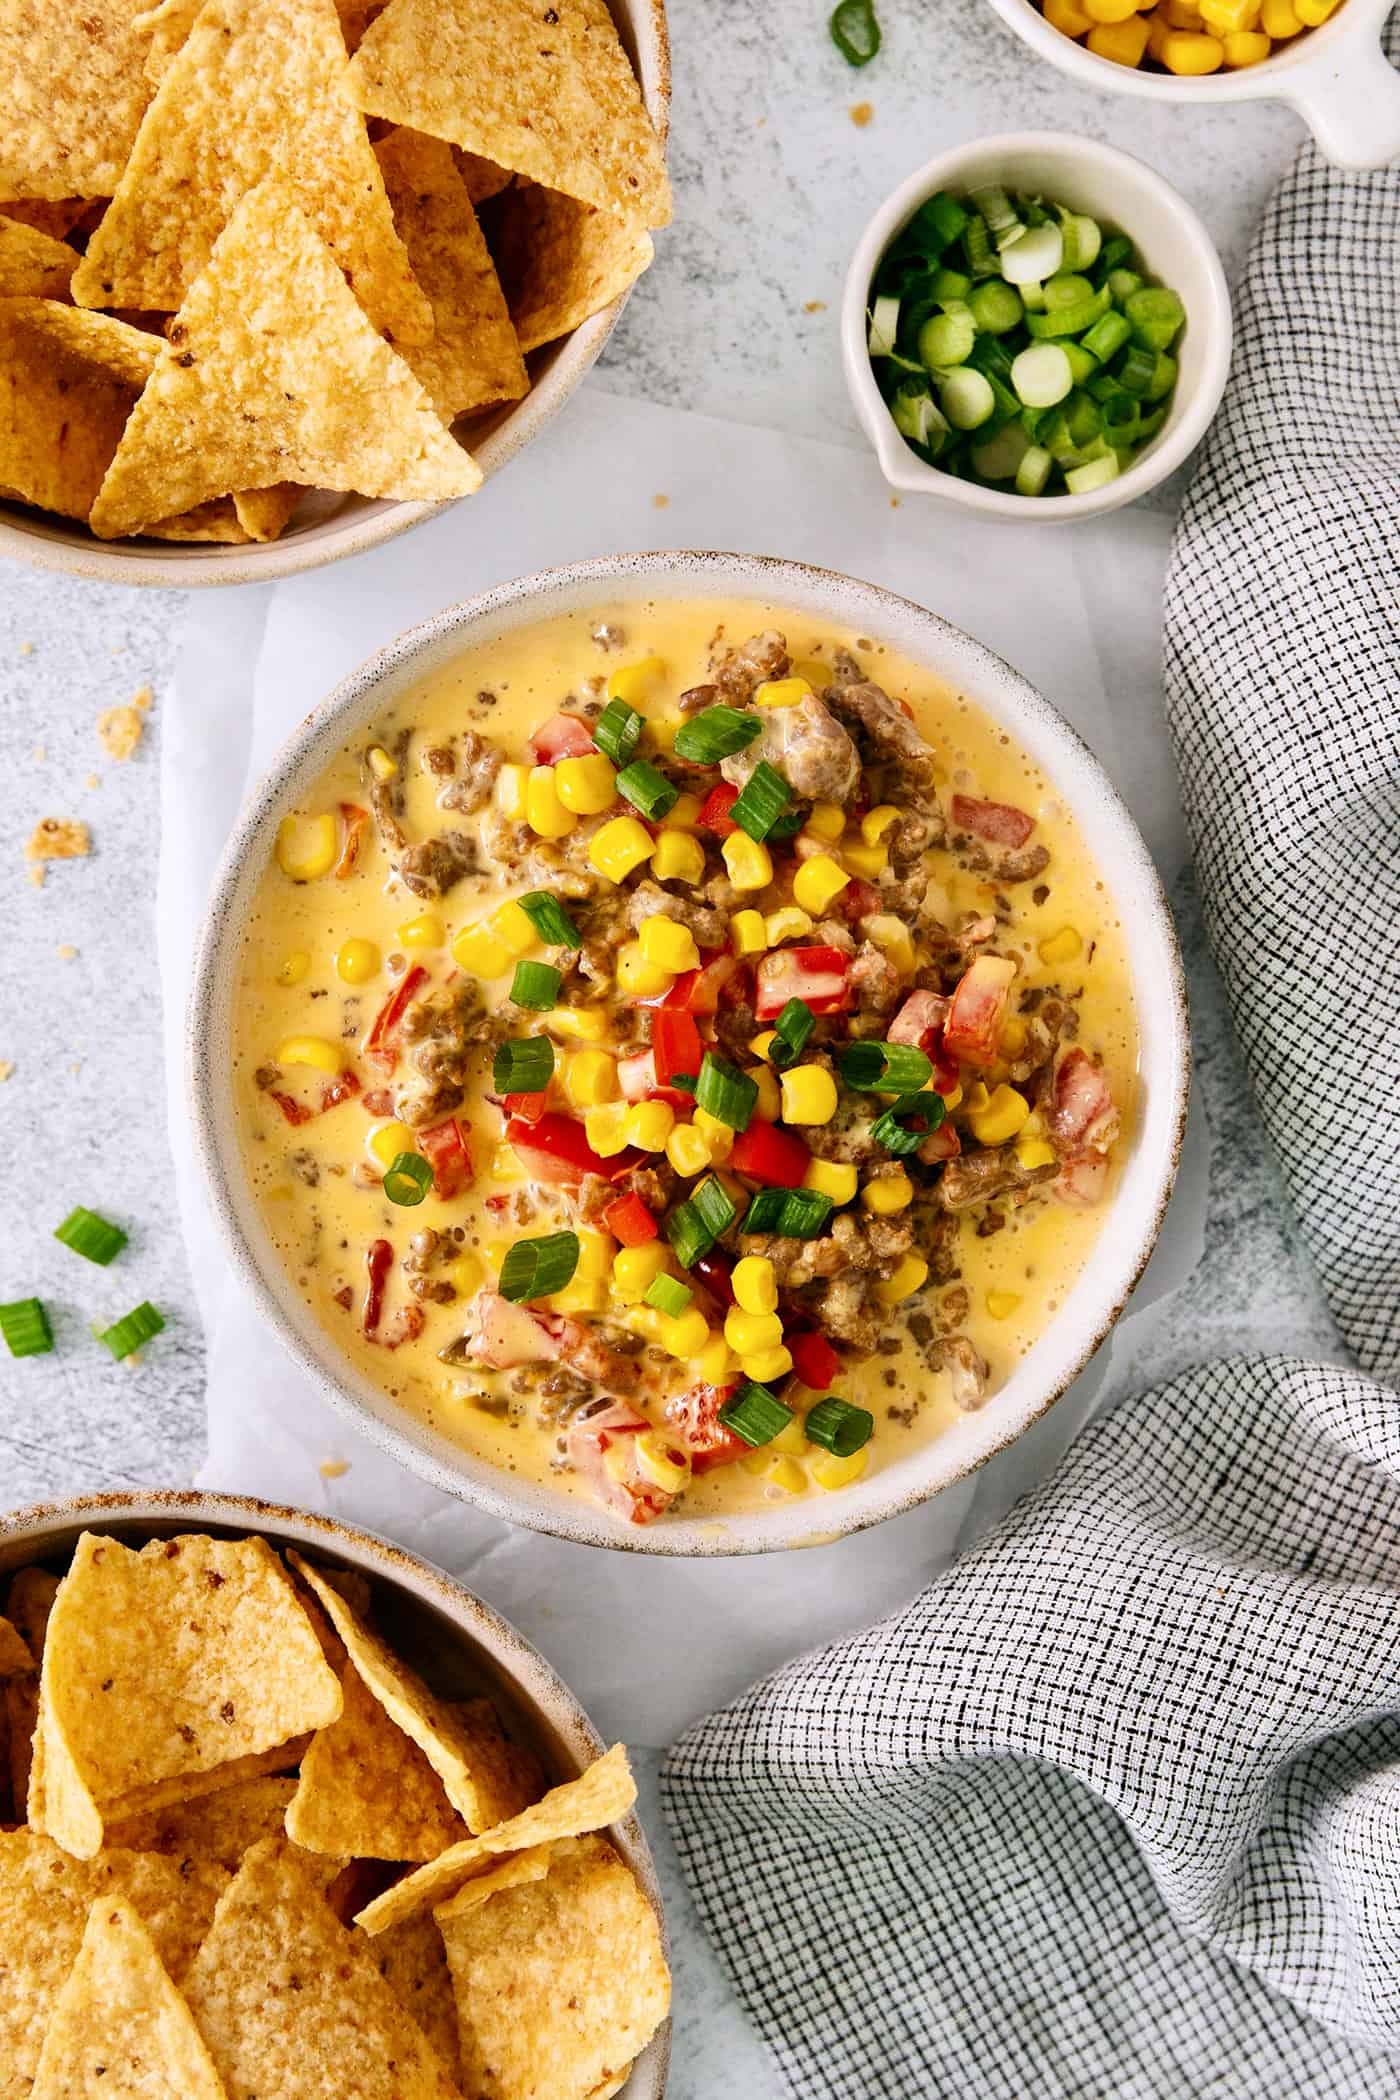 Cheesy corn sausage dip is topped with tomatoes, green onions, and tomatoes with bowls of corn chips for dipping nearby.